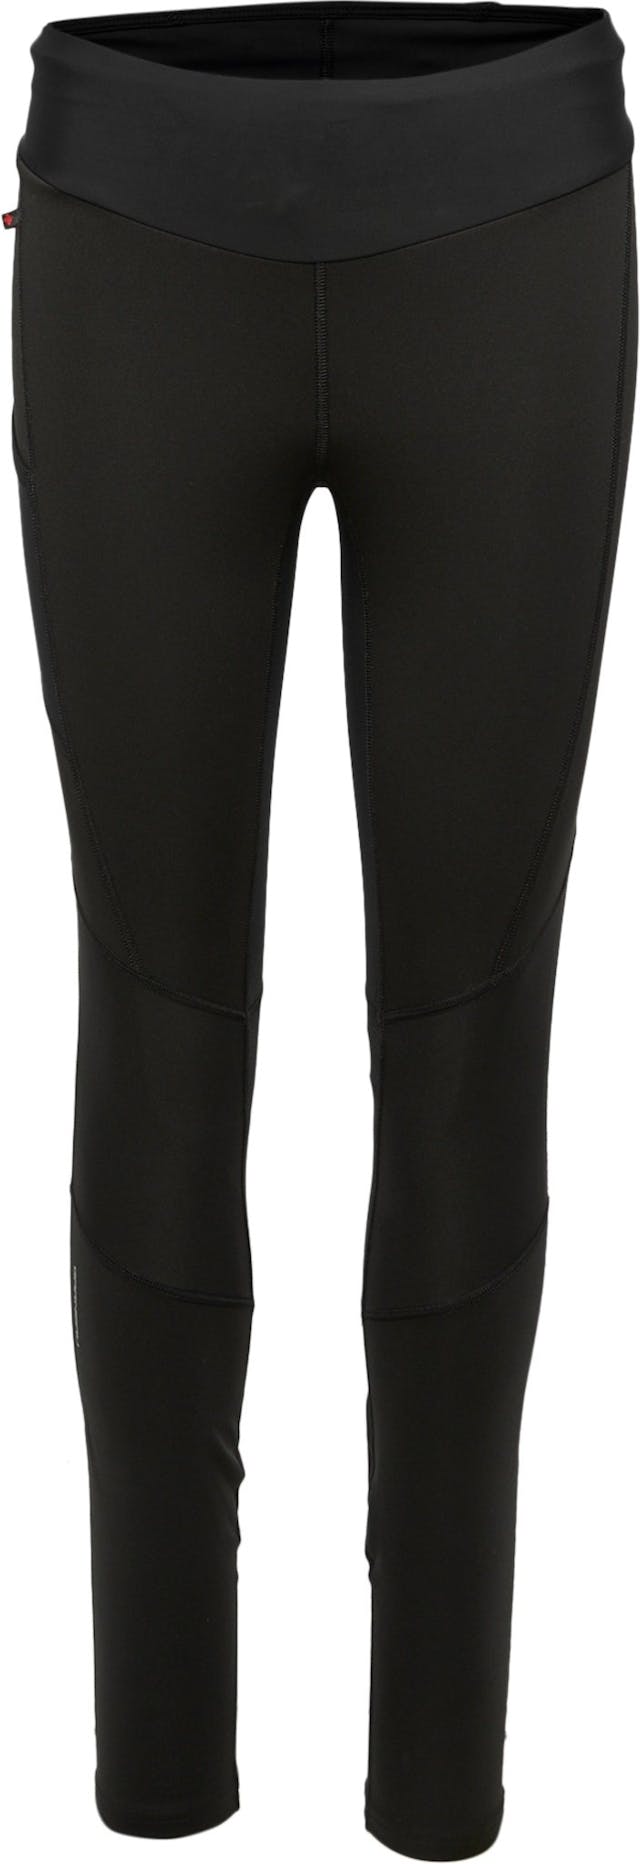 Product image for Solano Tights - Women's